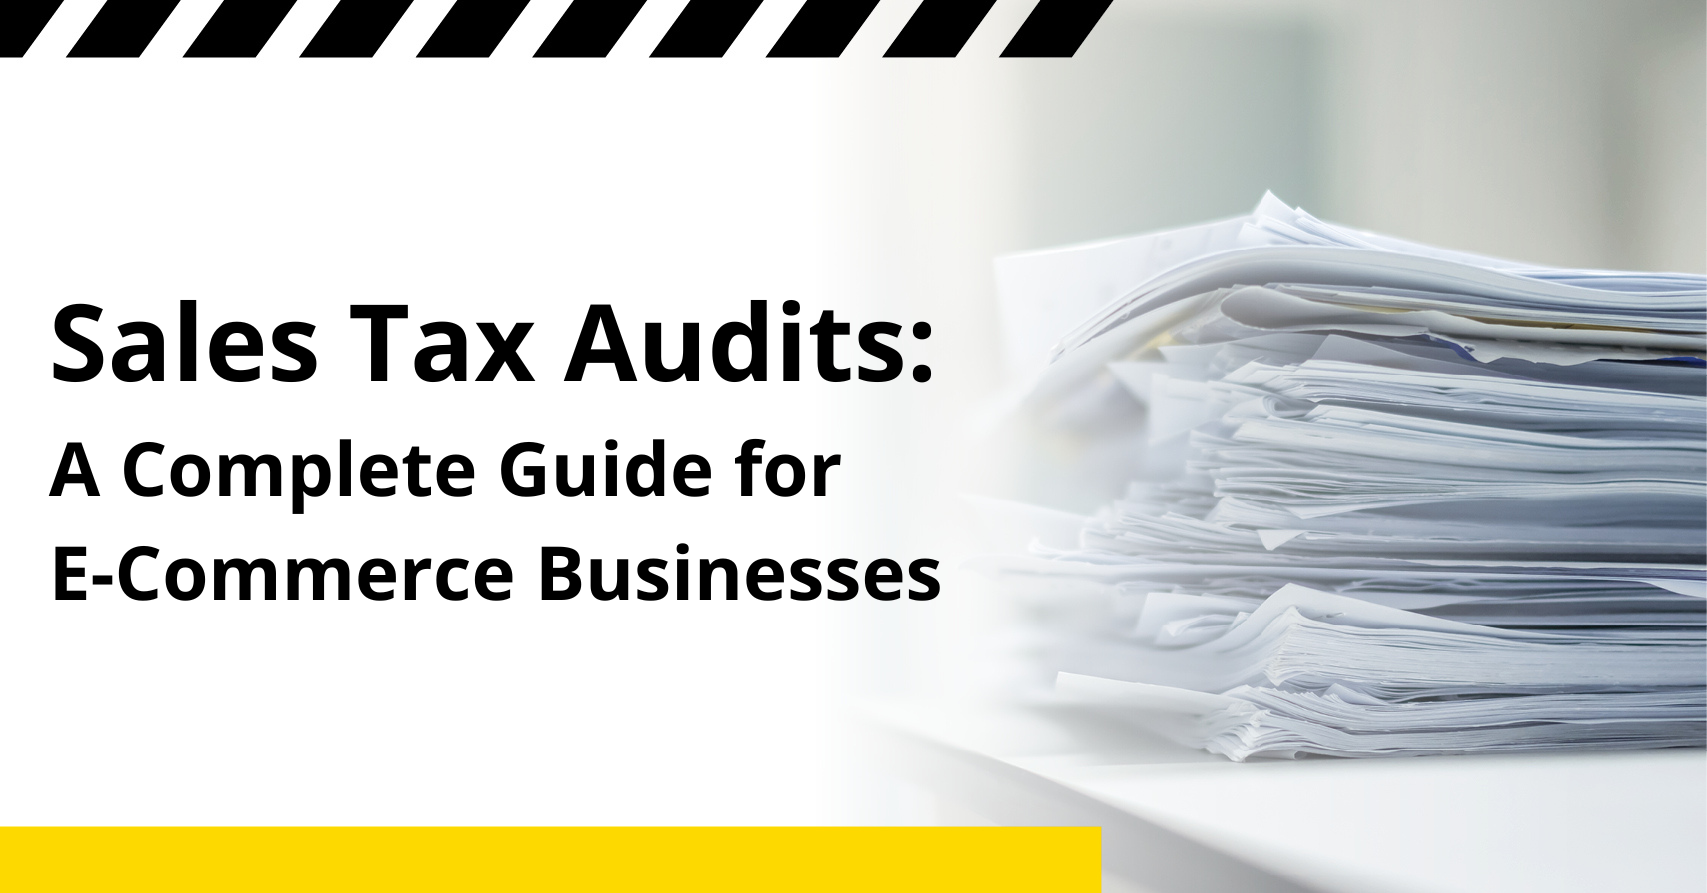 Everything e-commerce sellers need to know if being audited for sales tax